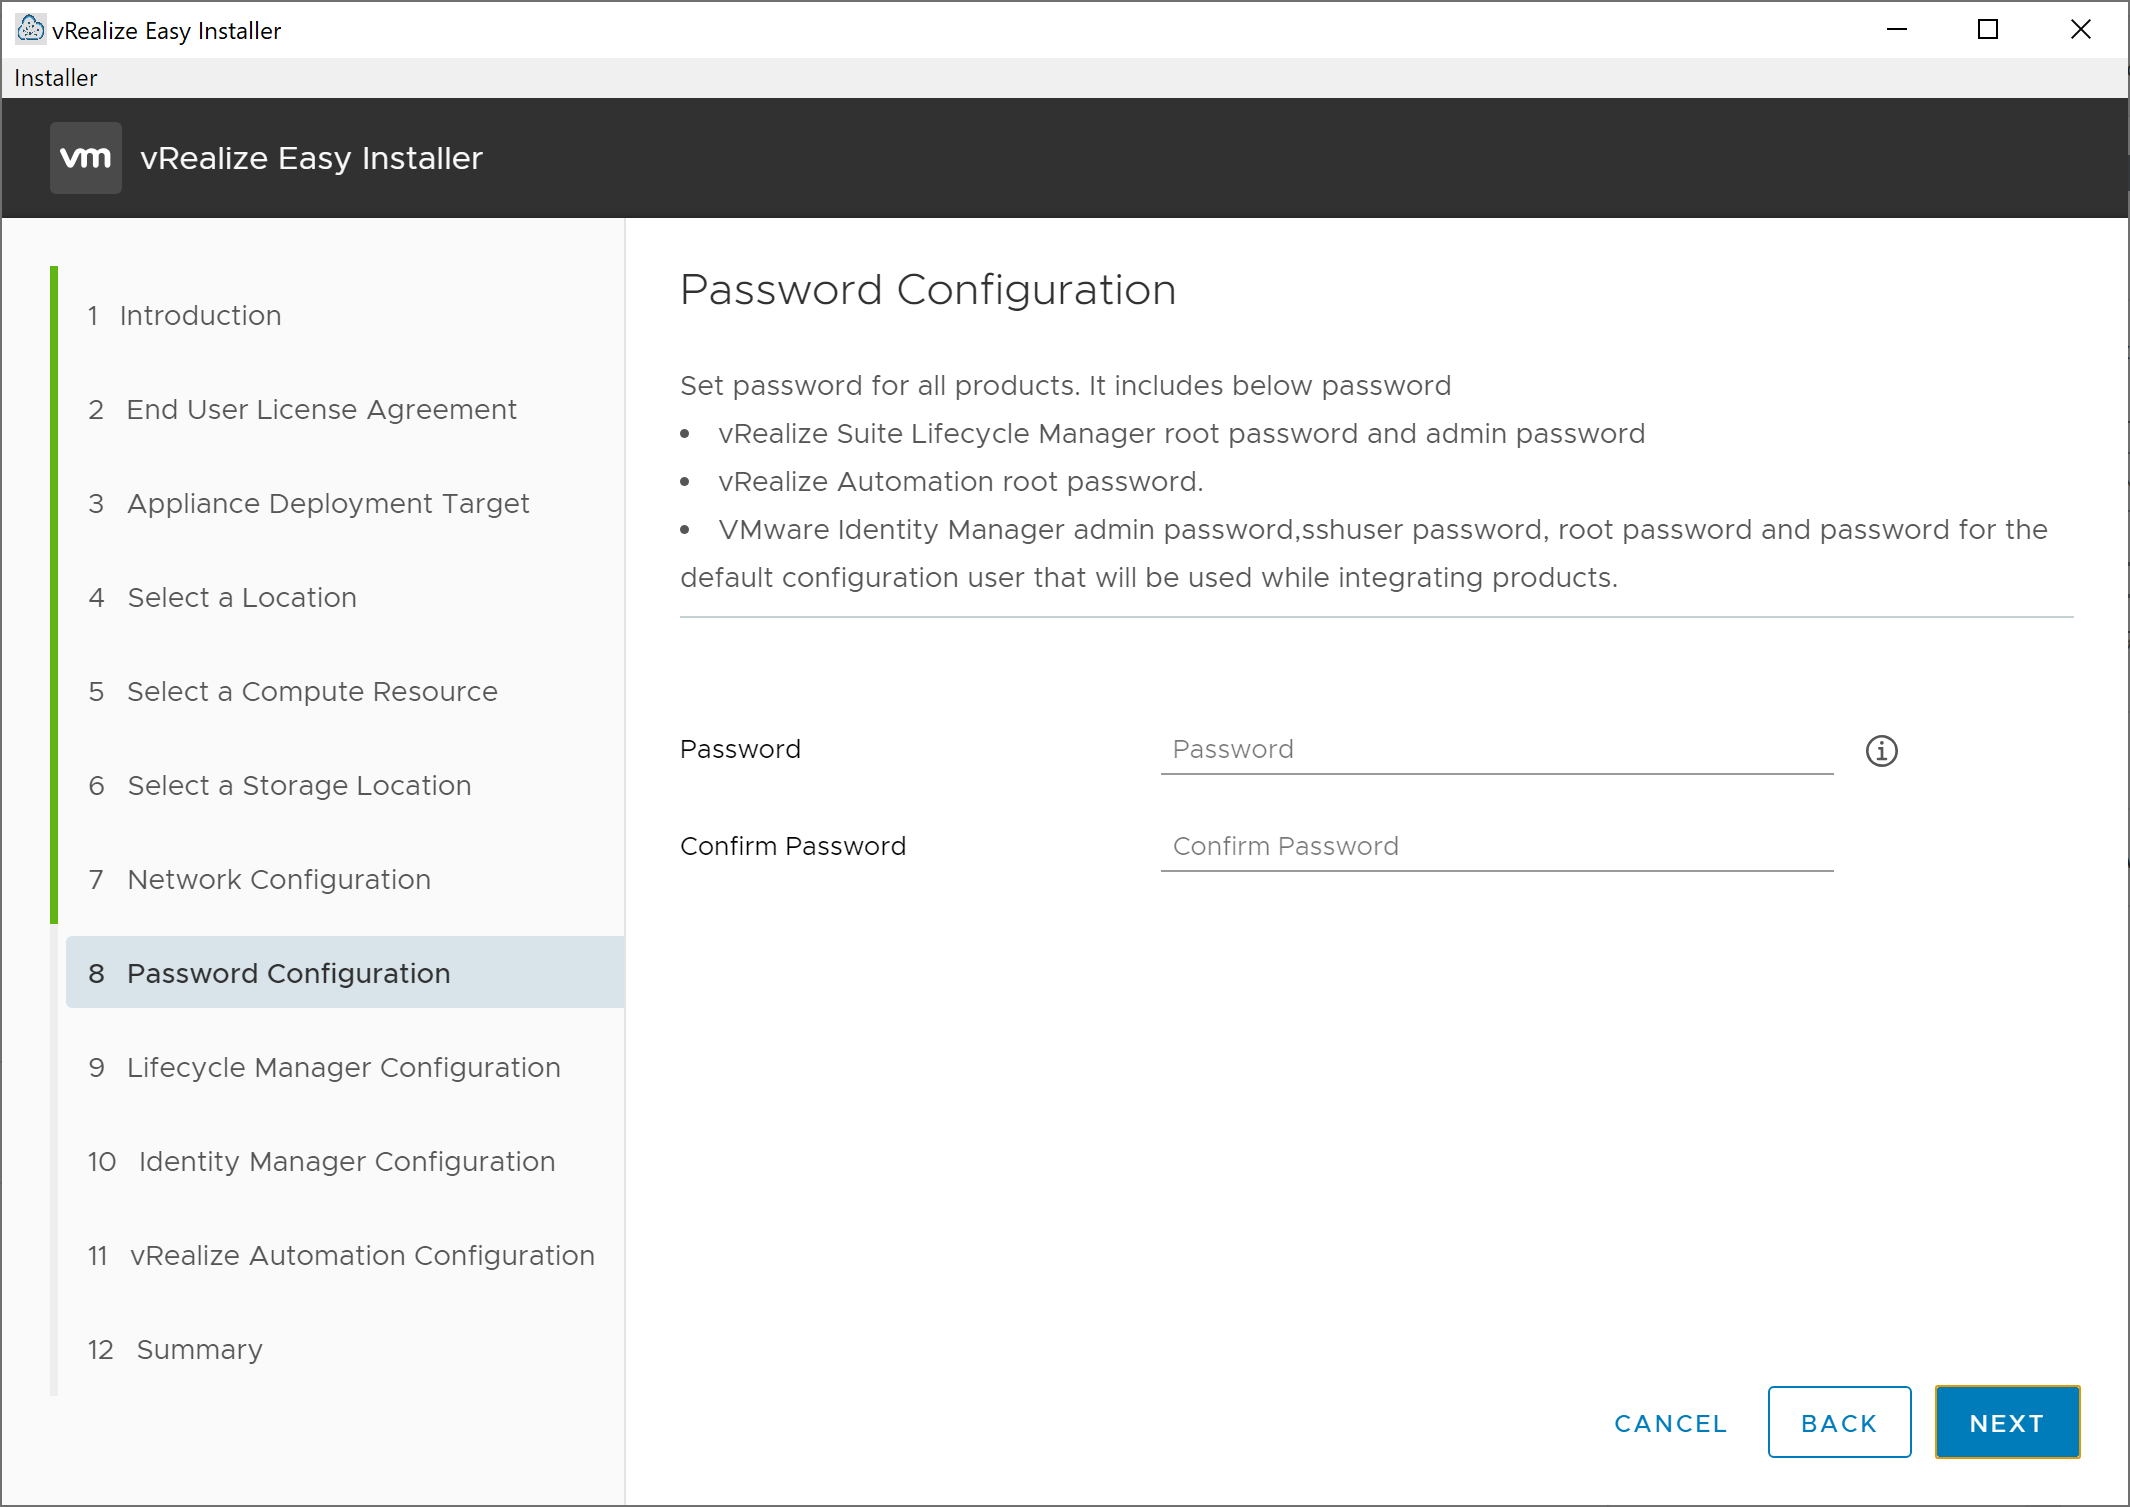 vRealize Easy Installer - New Install - Password Configuration